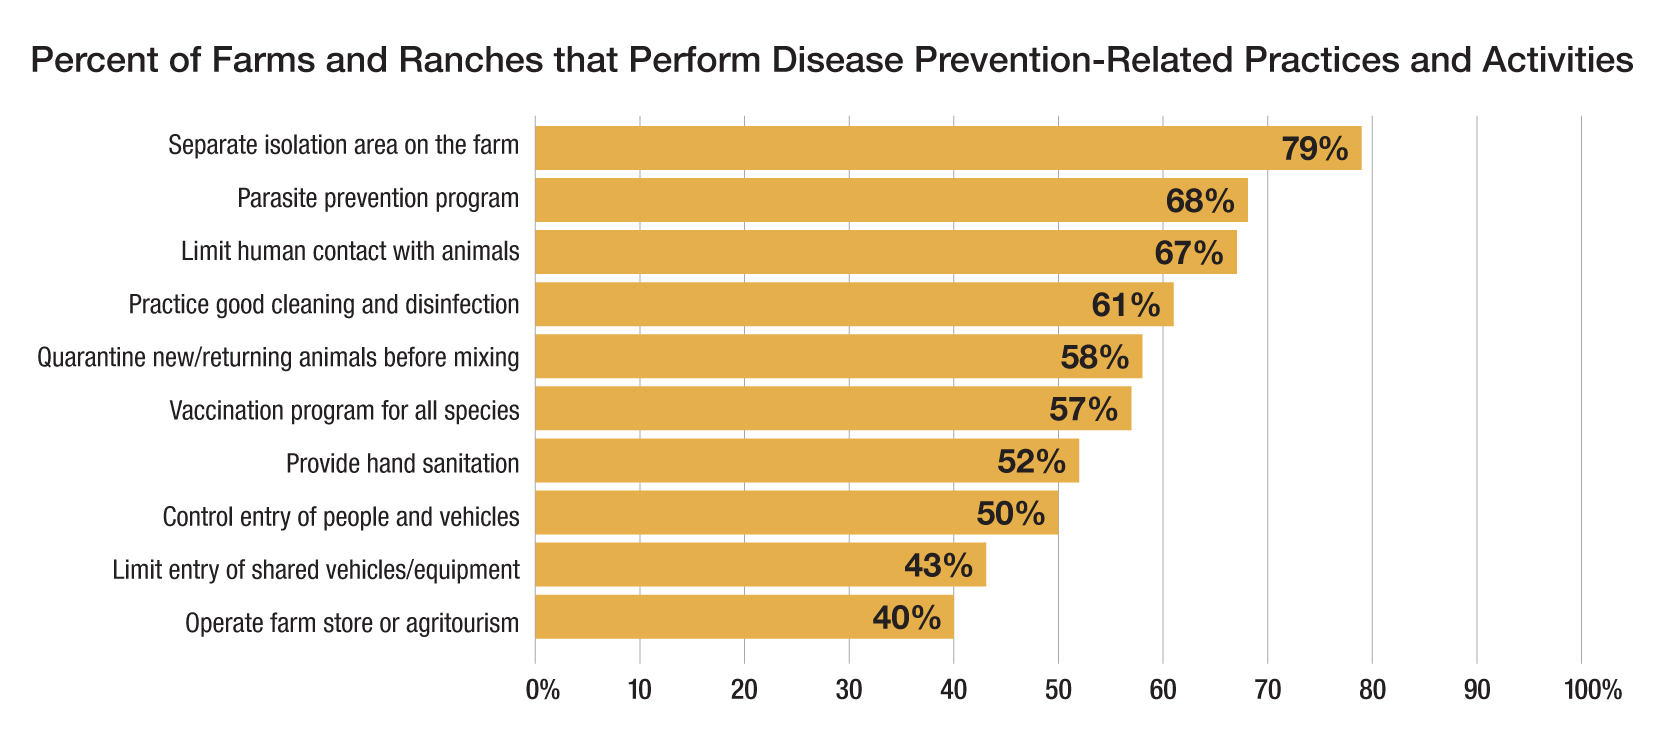 Percent of farms and ranches that perform disease prevention-related practices and activities